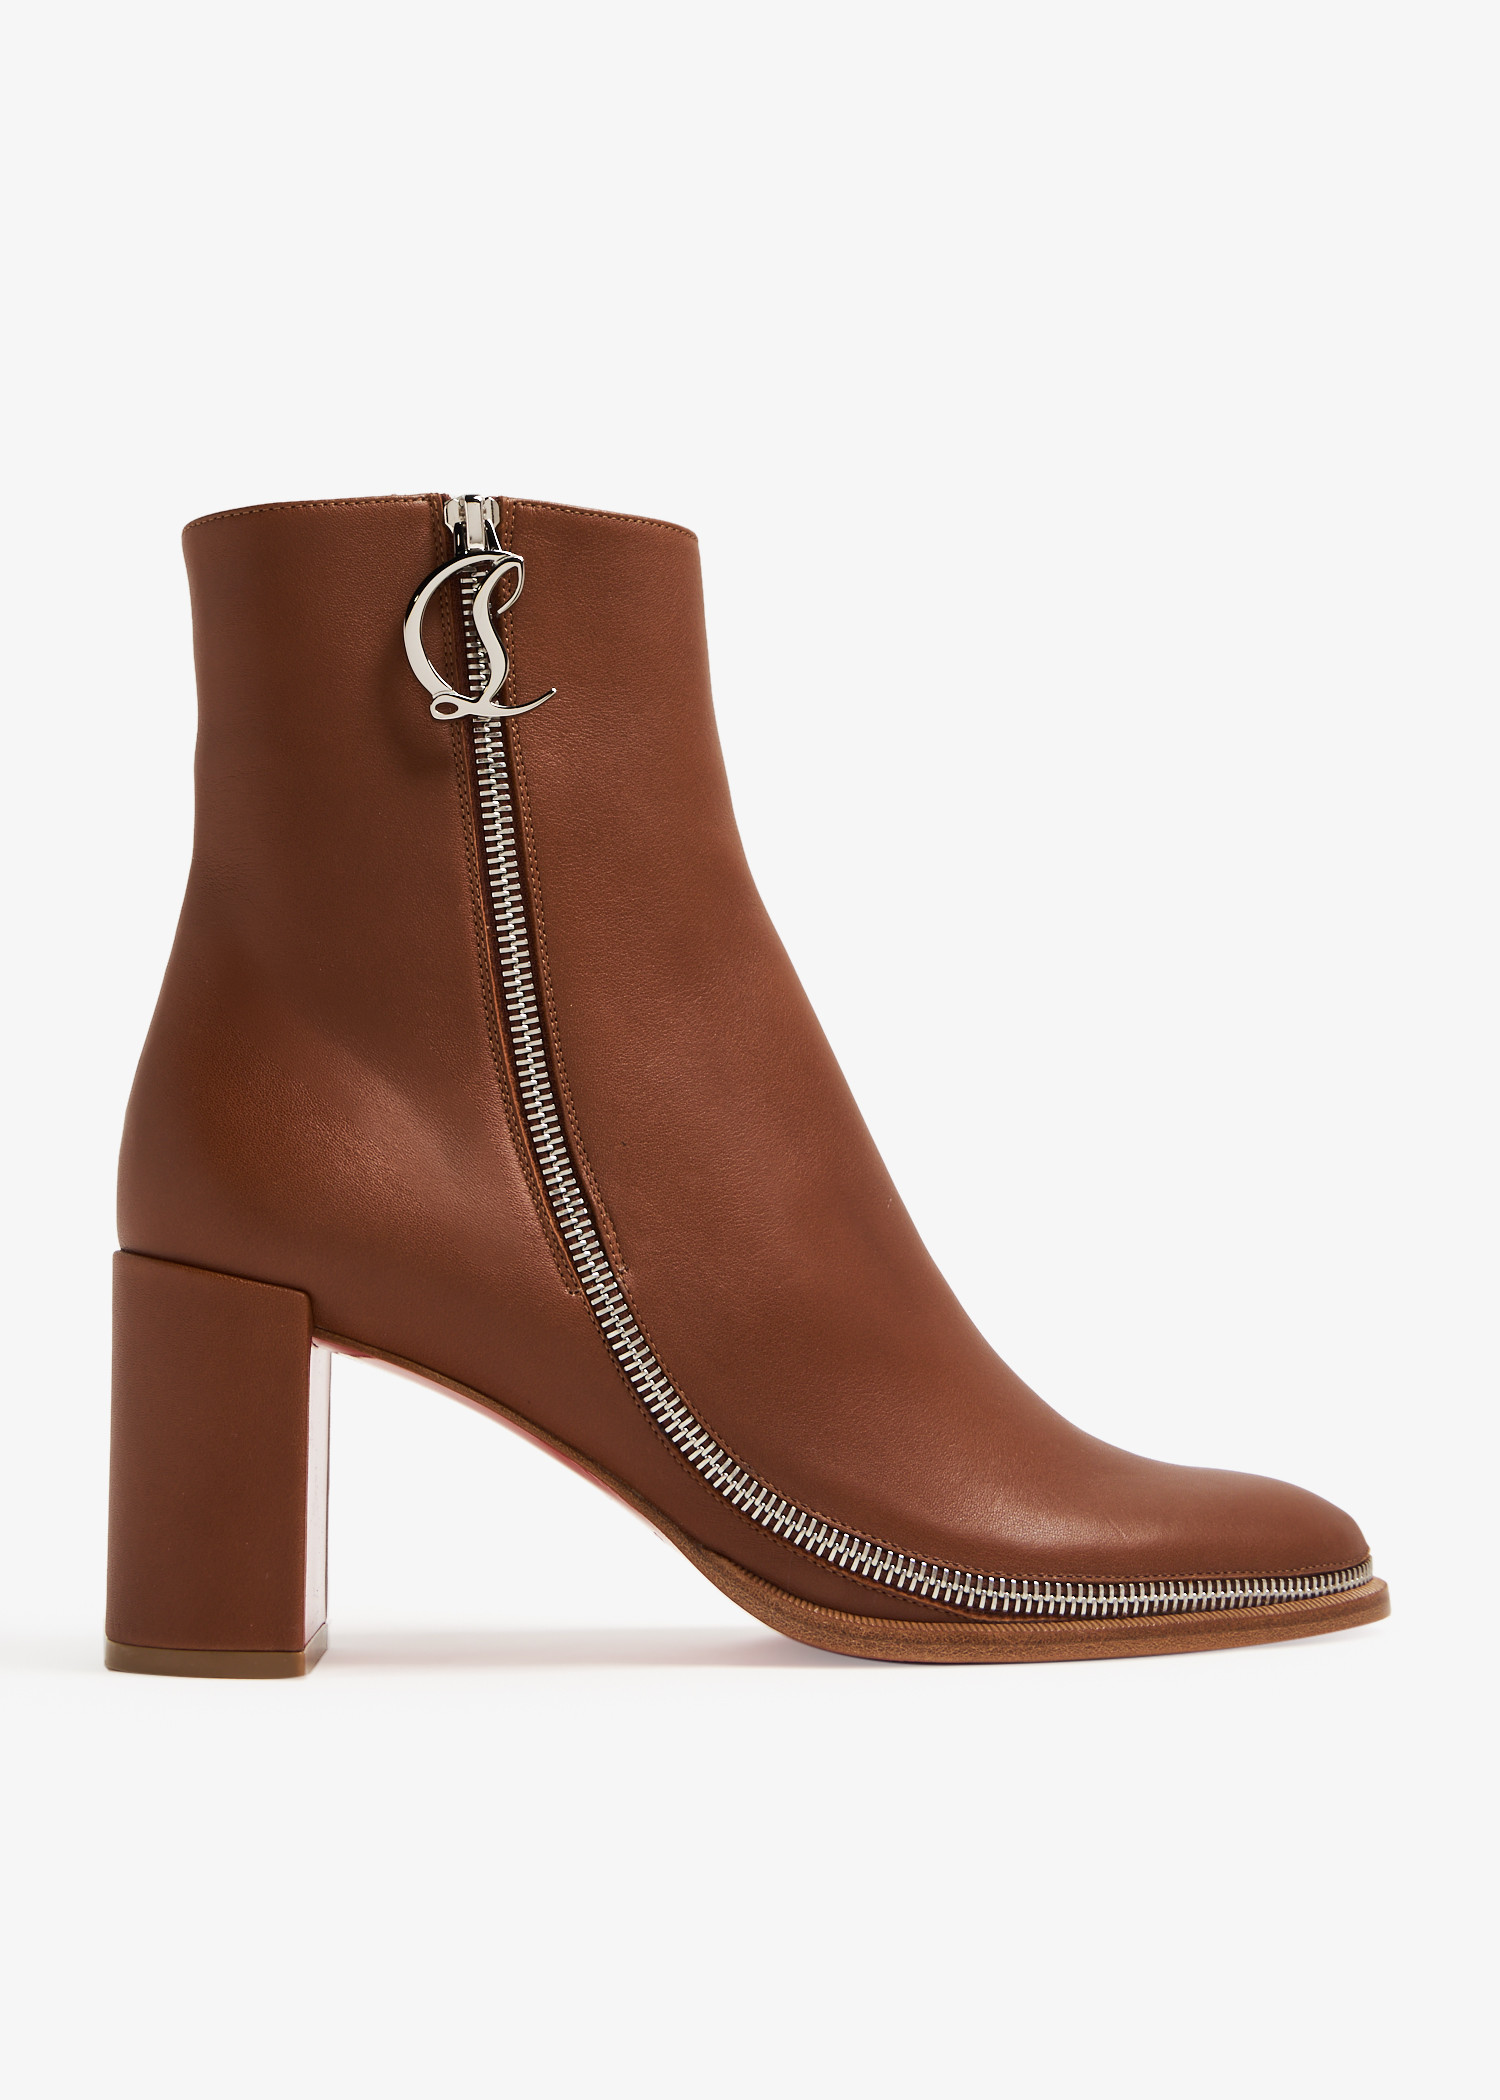 Christian Louboutin CL Zip Booty 70 boots for Women - Brown in UAE